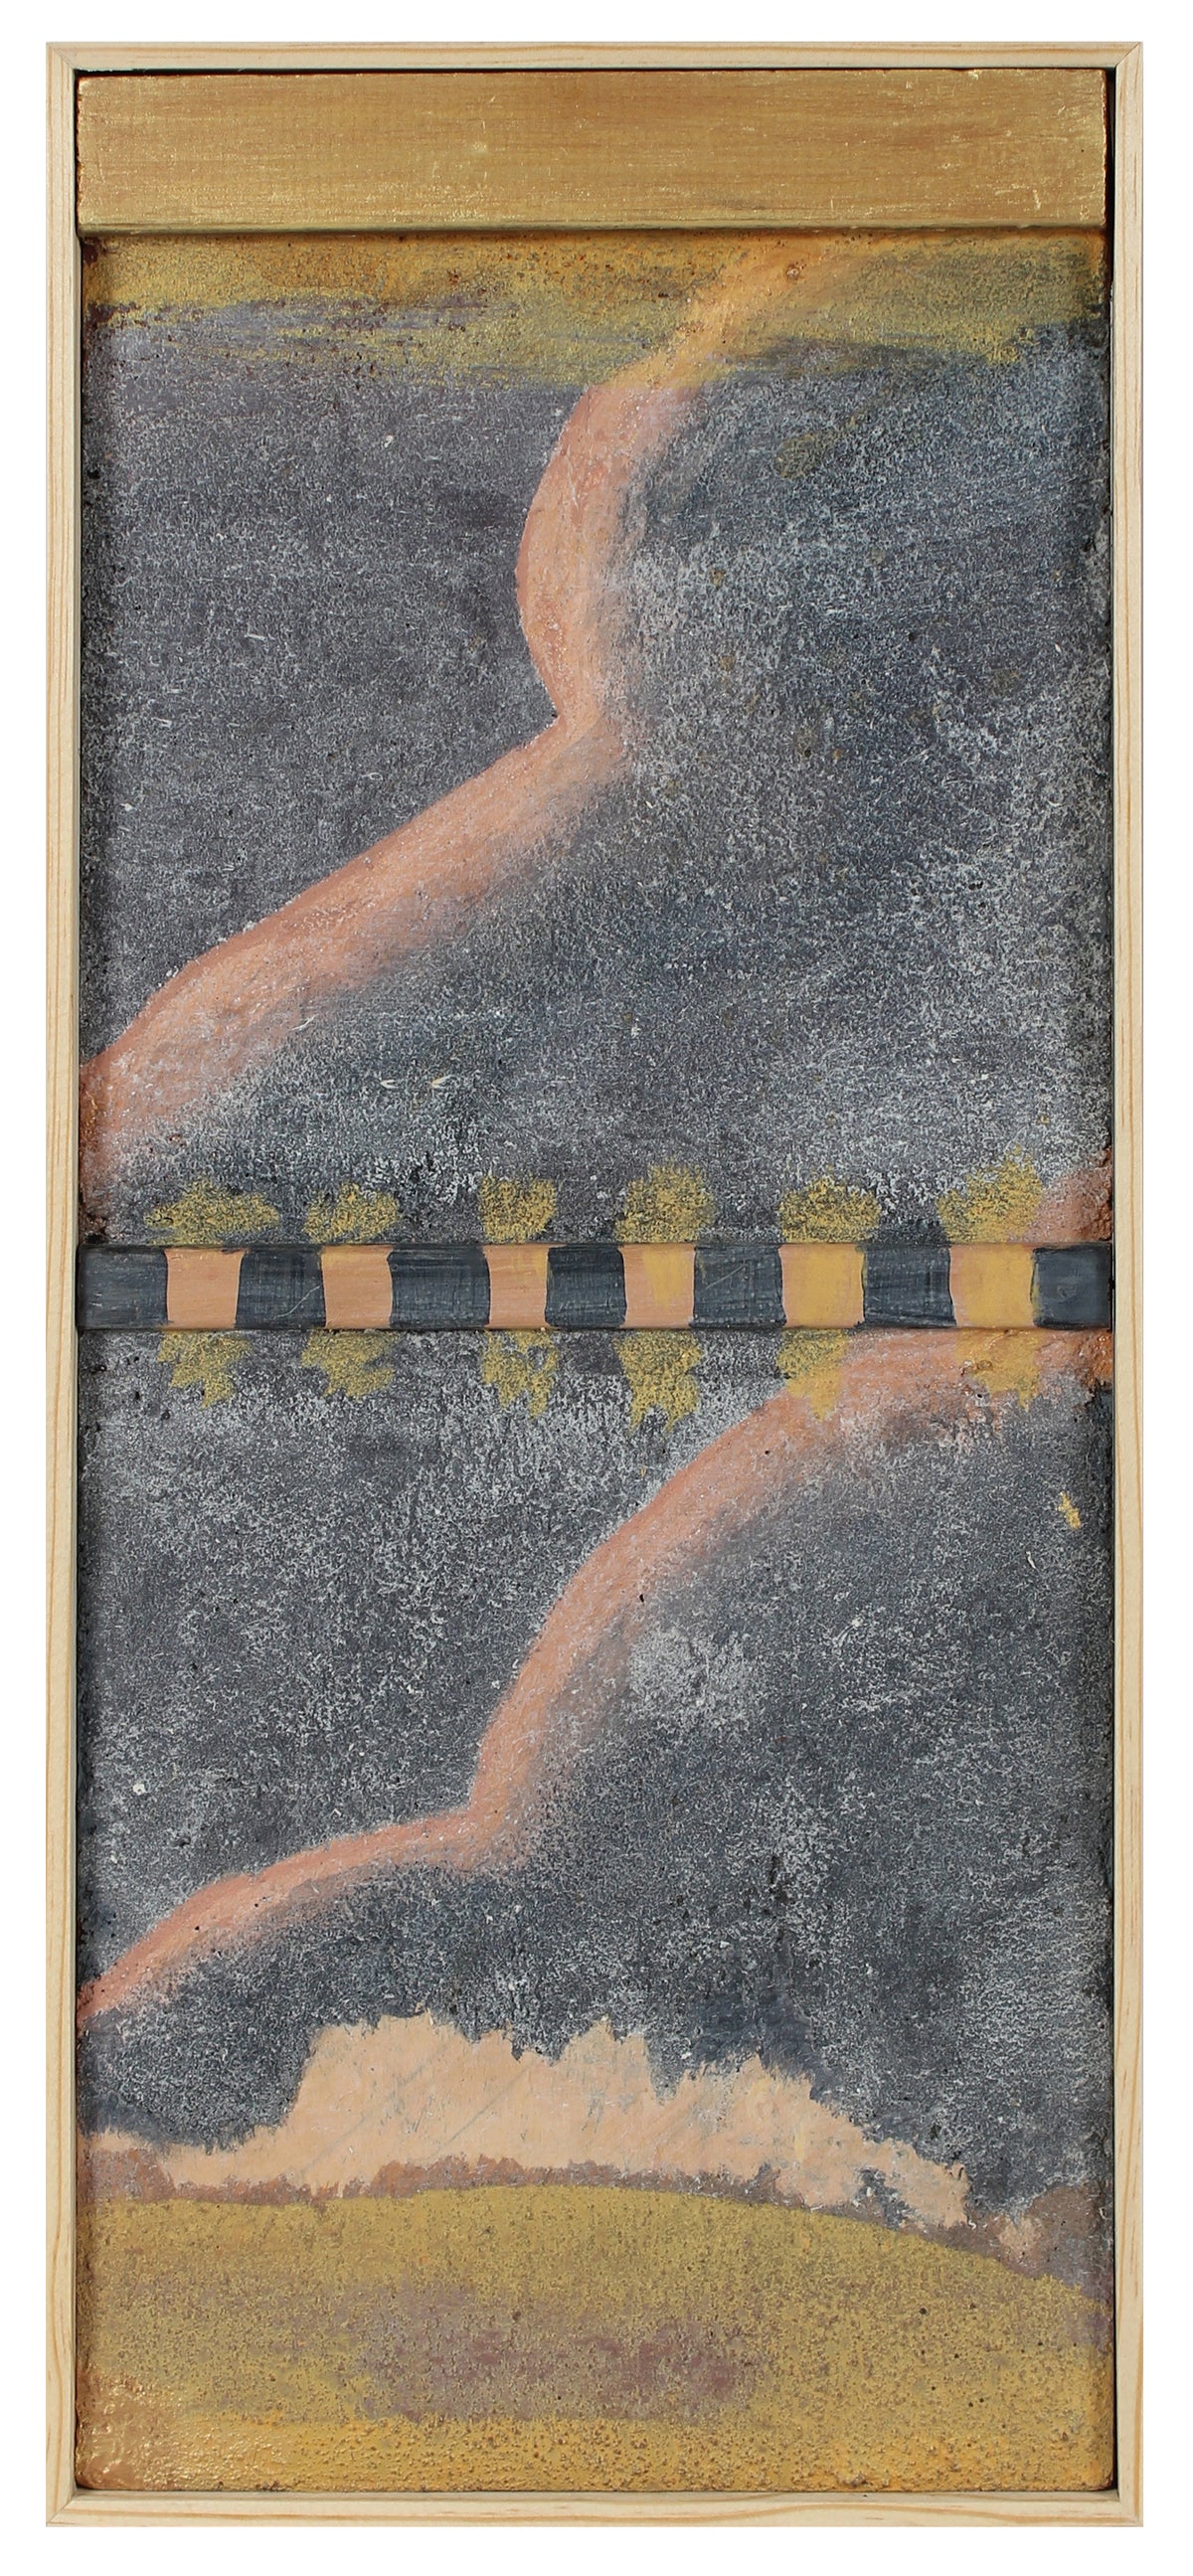 Layered Abstract Mixed Media&lt;br&gt;Sand, Cement &amp; Paint on Wood&lt;br&gt;&lt;br&gt;#96150